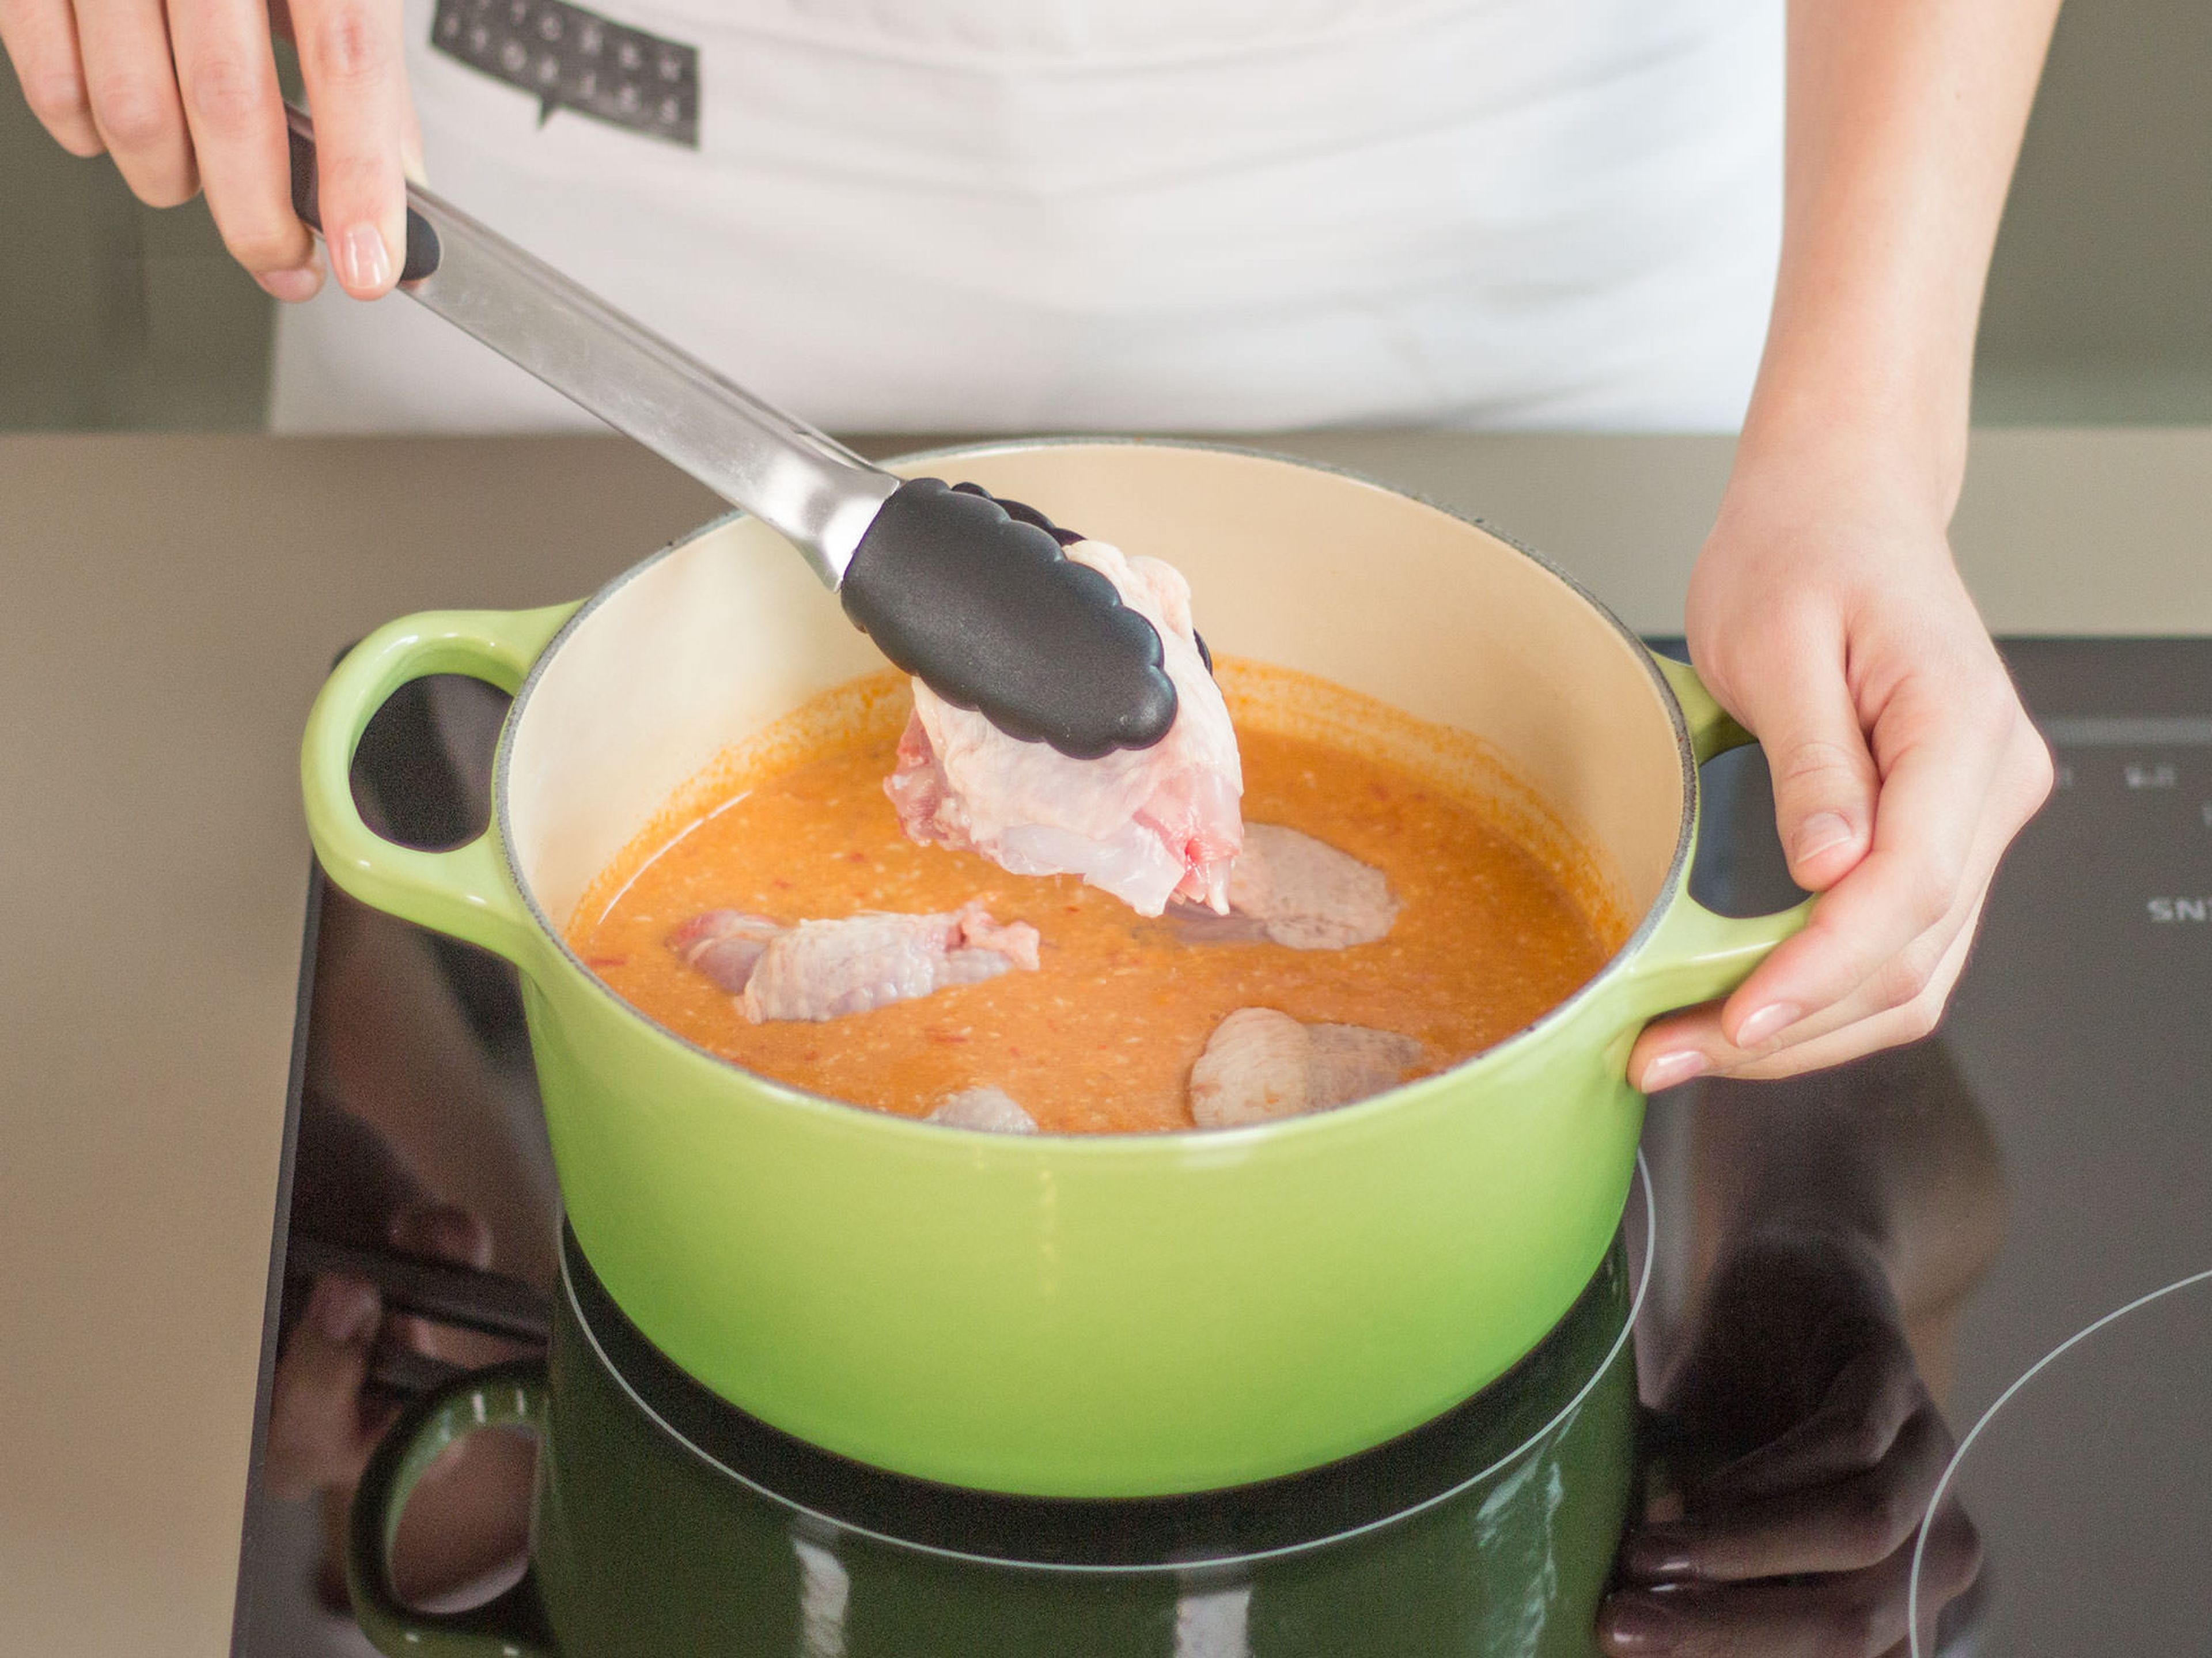 In a large saucepan, bring chicken stock to a boil and add chili pesto. Stir thoroughly until everything is fully combined. Now, add chicken thighs and simmer for approx. 3 – 5 min. Remove from heat.